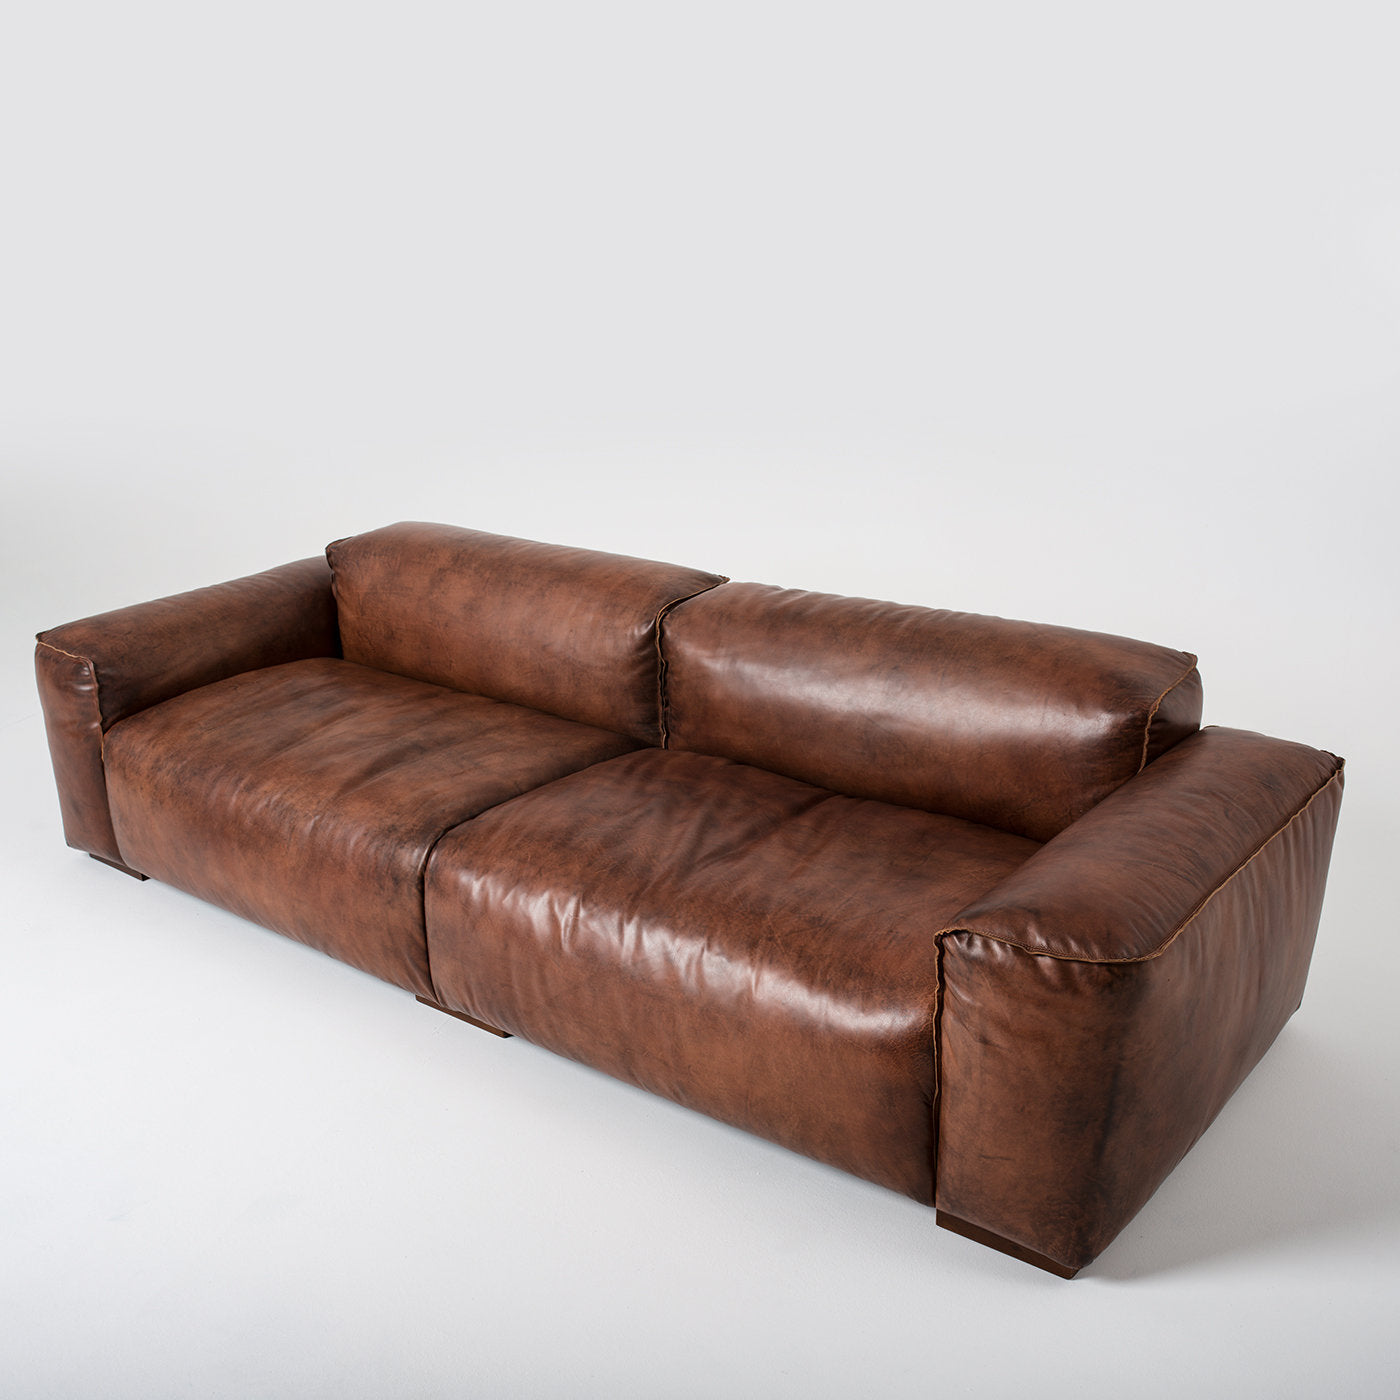 Lazy sofa by Marco and Giulio Mantellassi - Alternative view 1